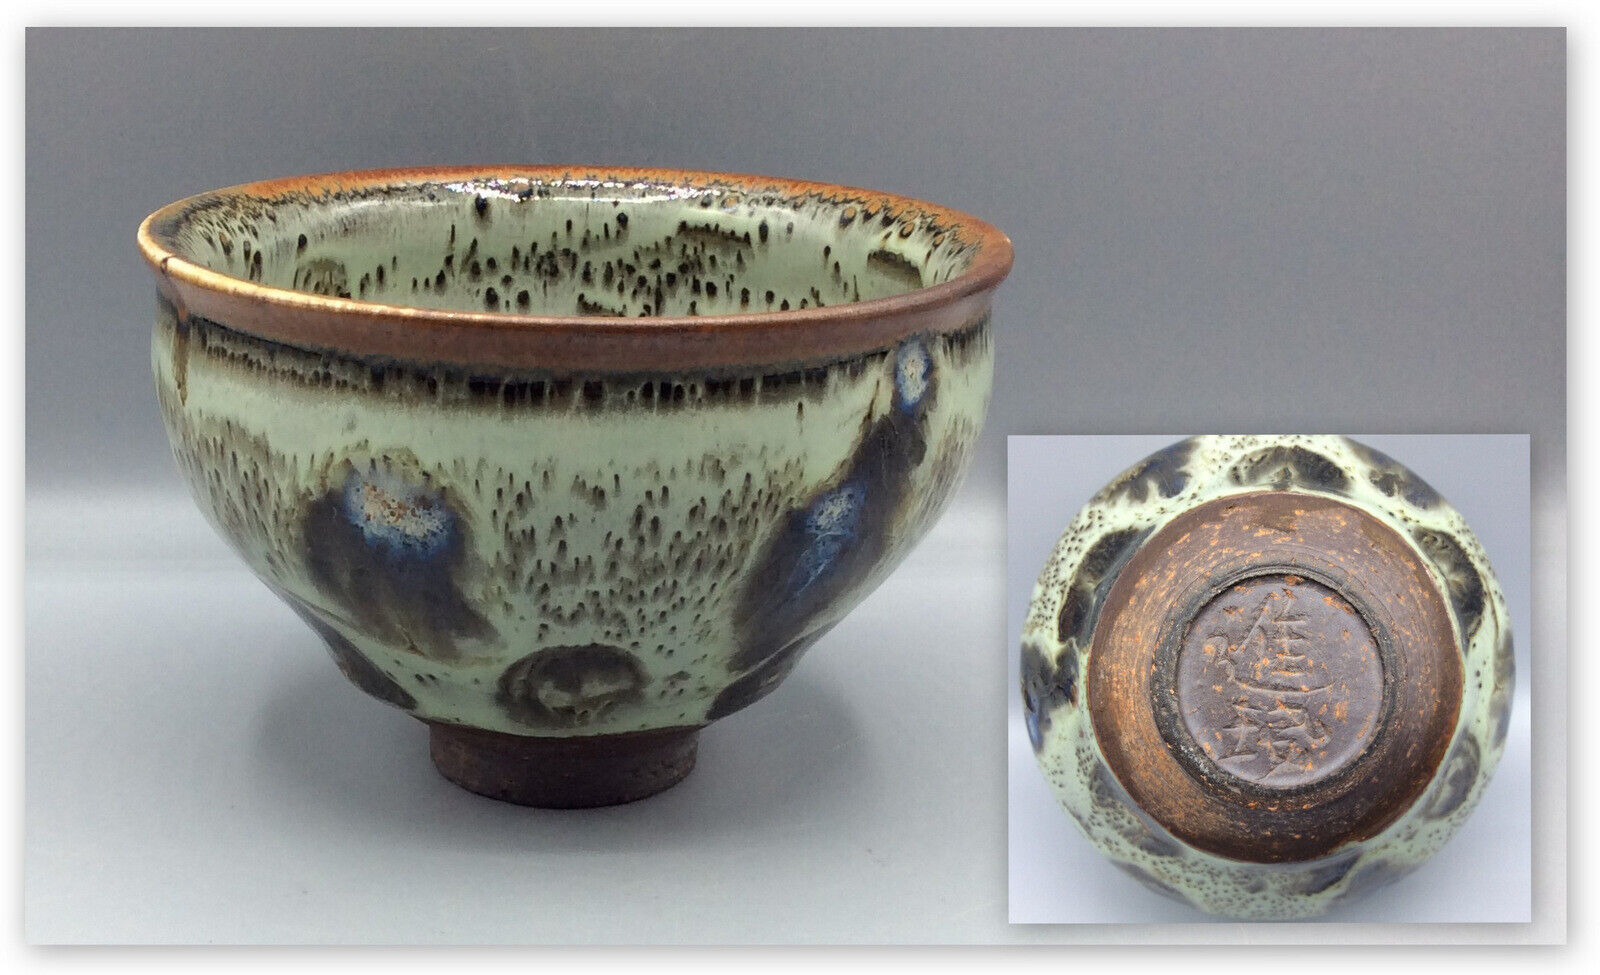 Antique Valuations: Antique Chinese Studio Pottery Bowl with Mark on base